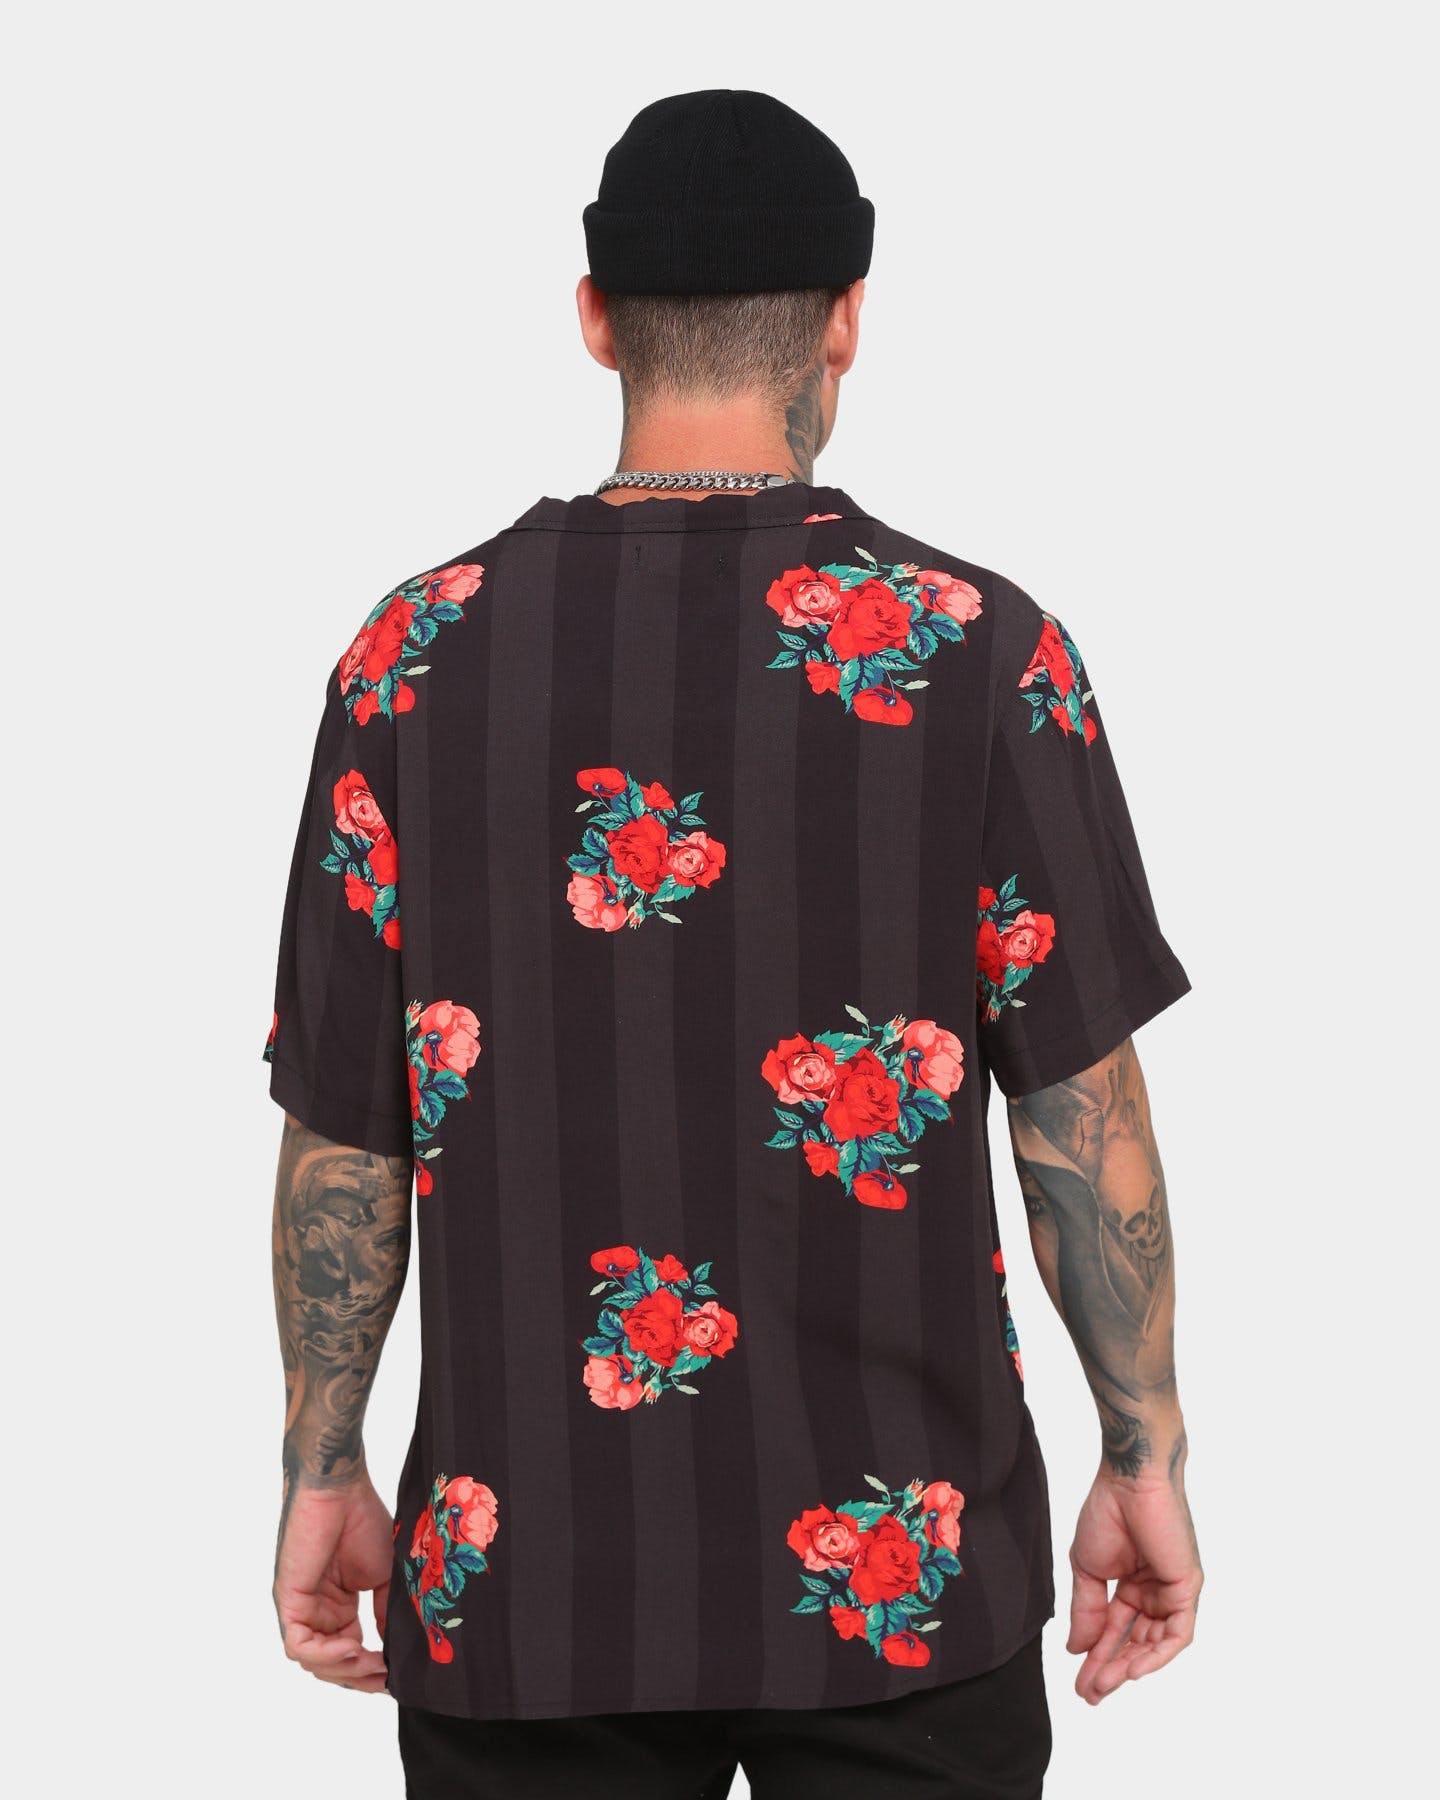 Great Floral Print  Piece To Add to Your Summer Wardrobe